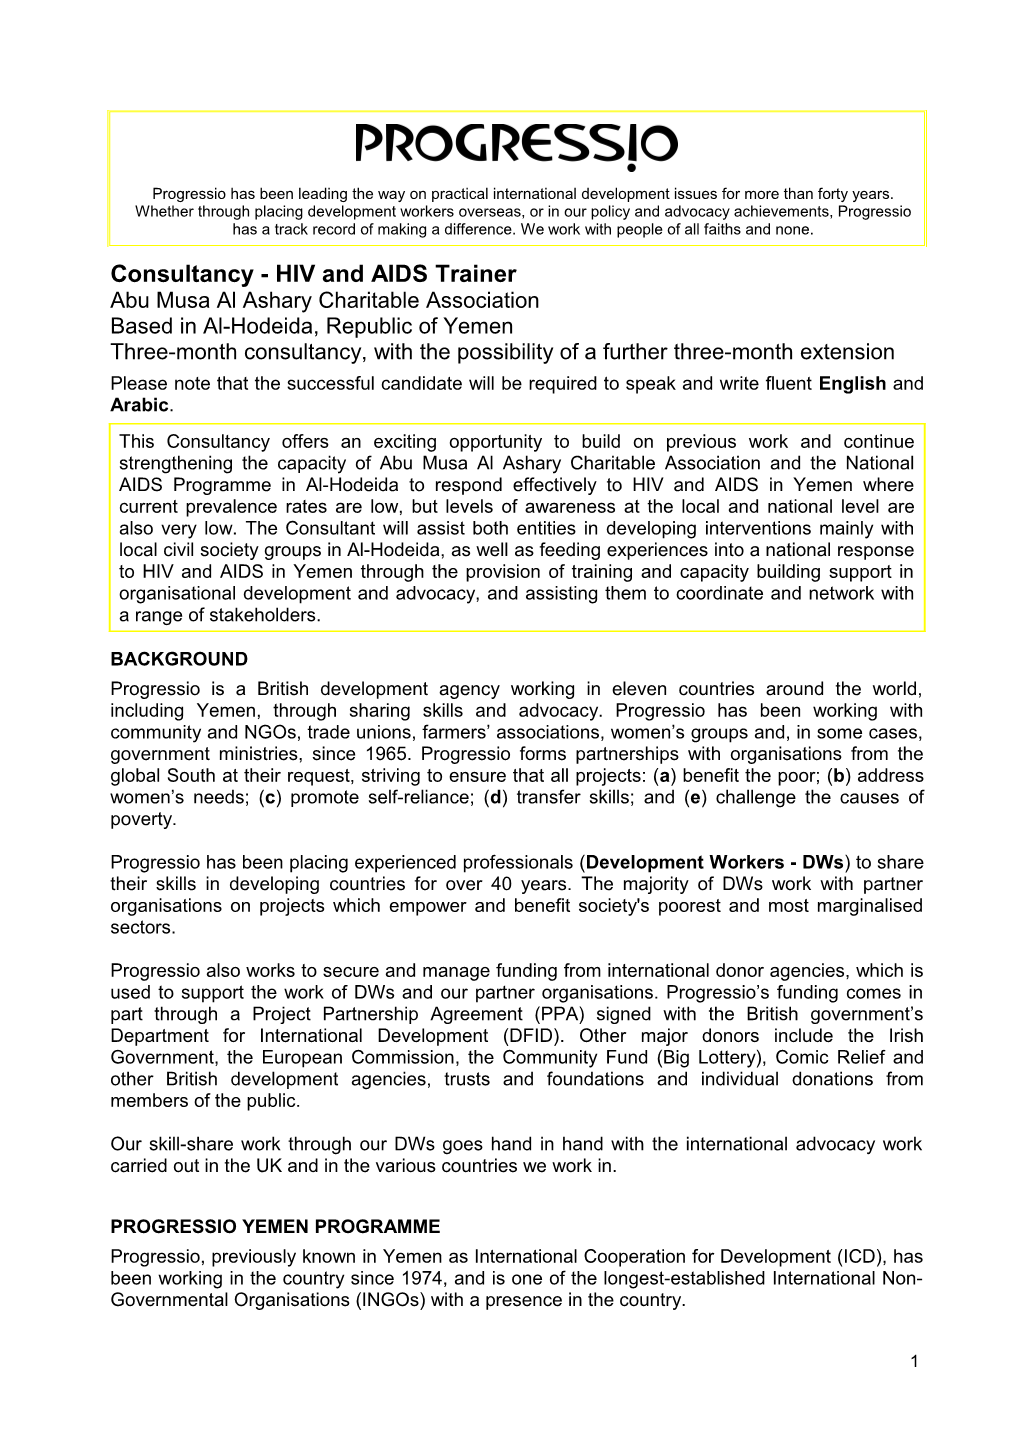 Consultancy - HIV and AIDS Trainer